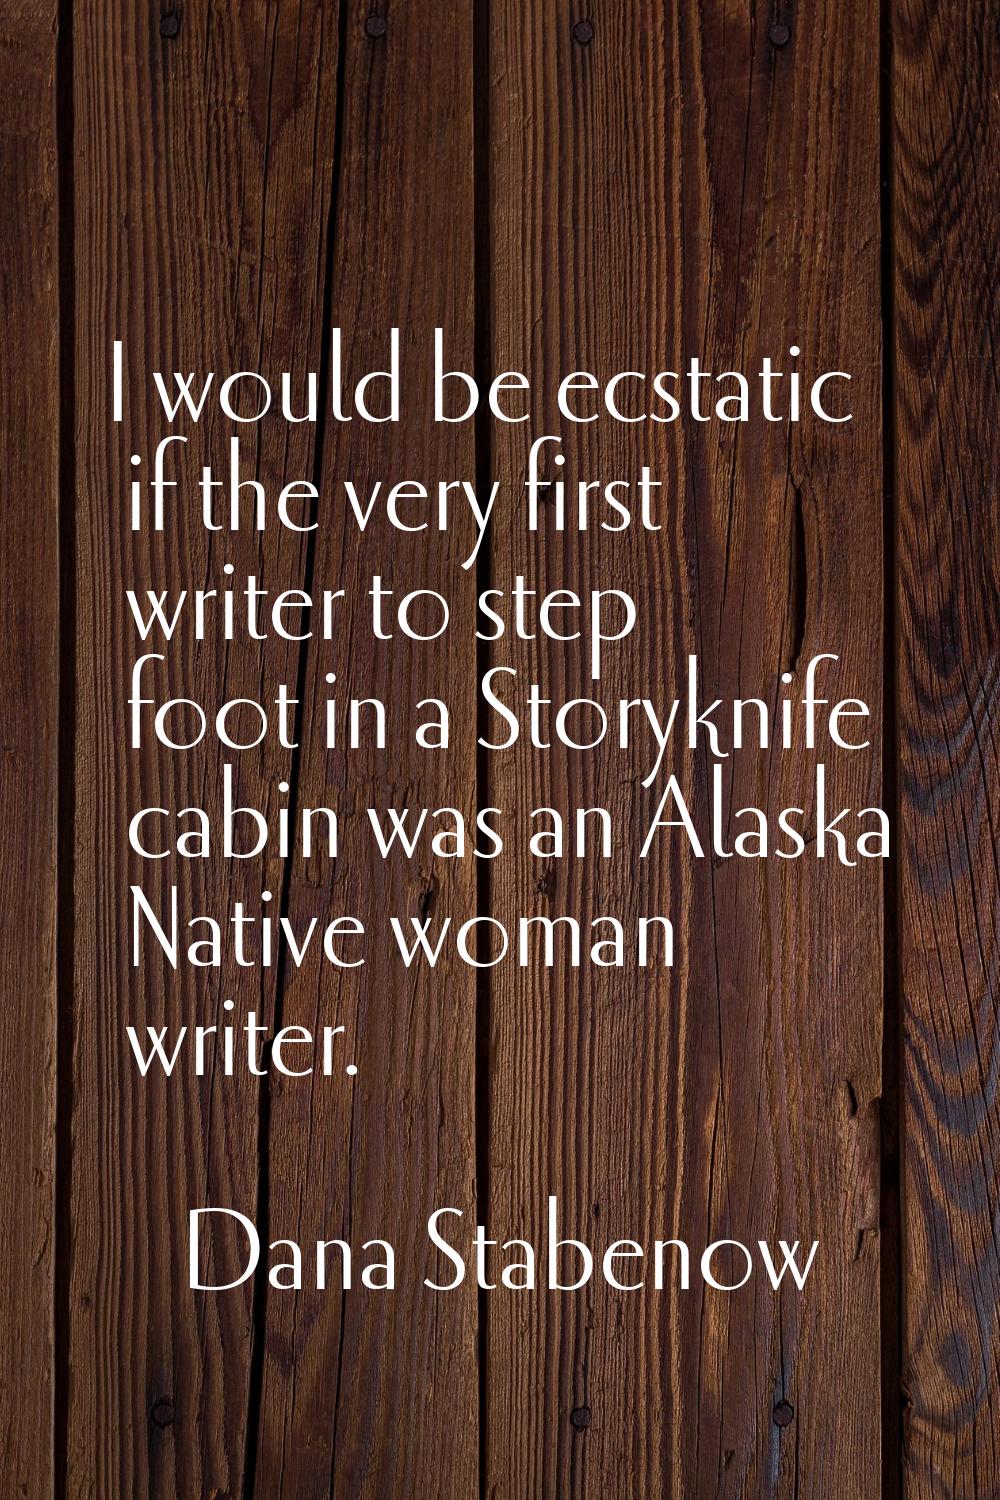 I would be ecstatic if the very first writer to step foot in a Storyknife cabin was an Alaska Nativ